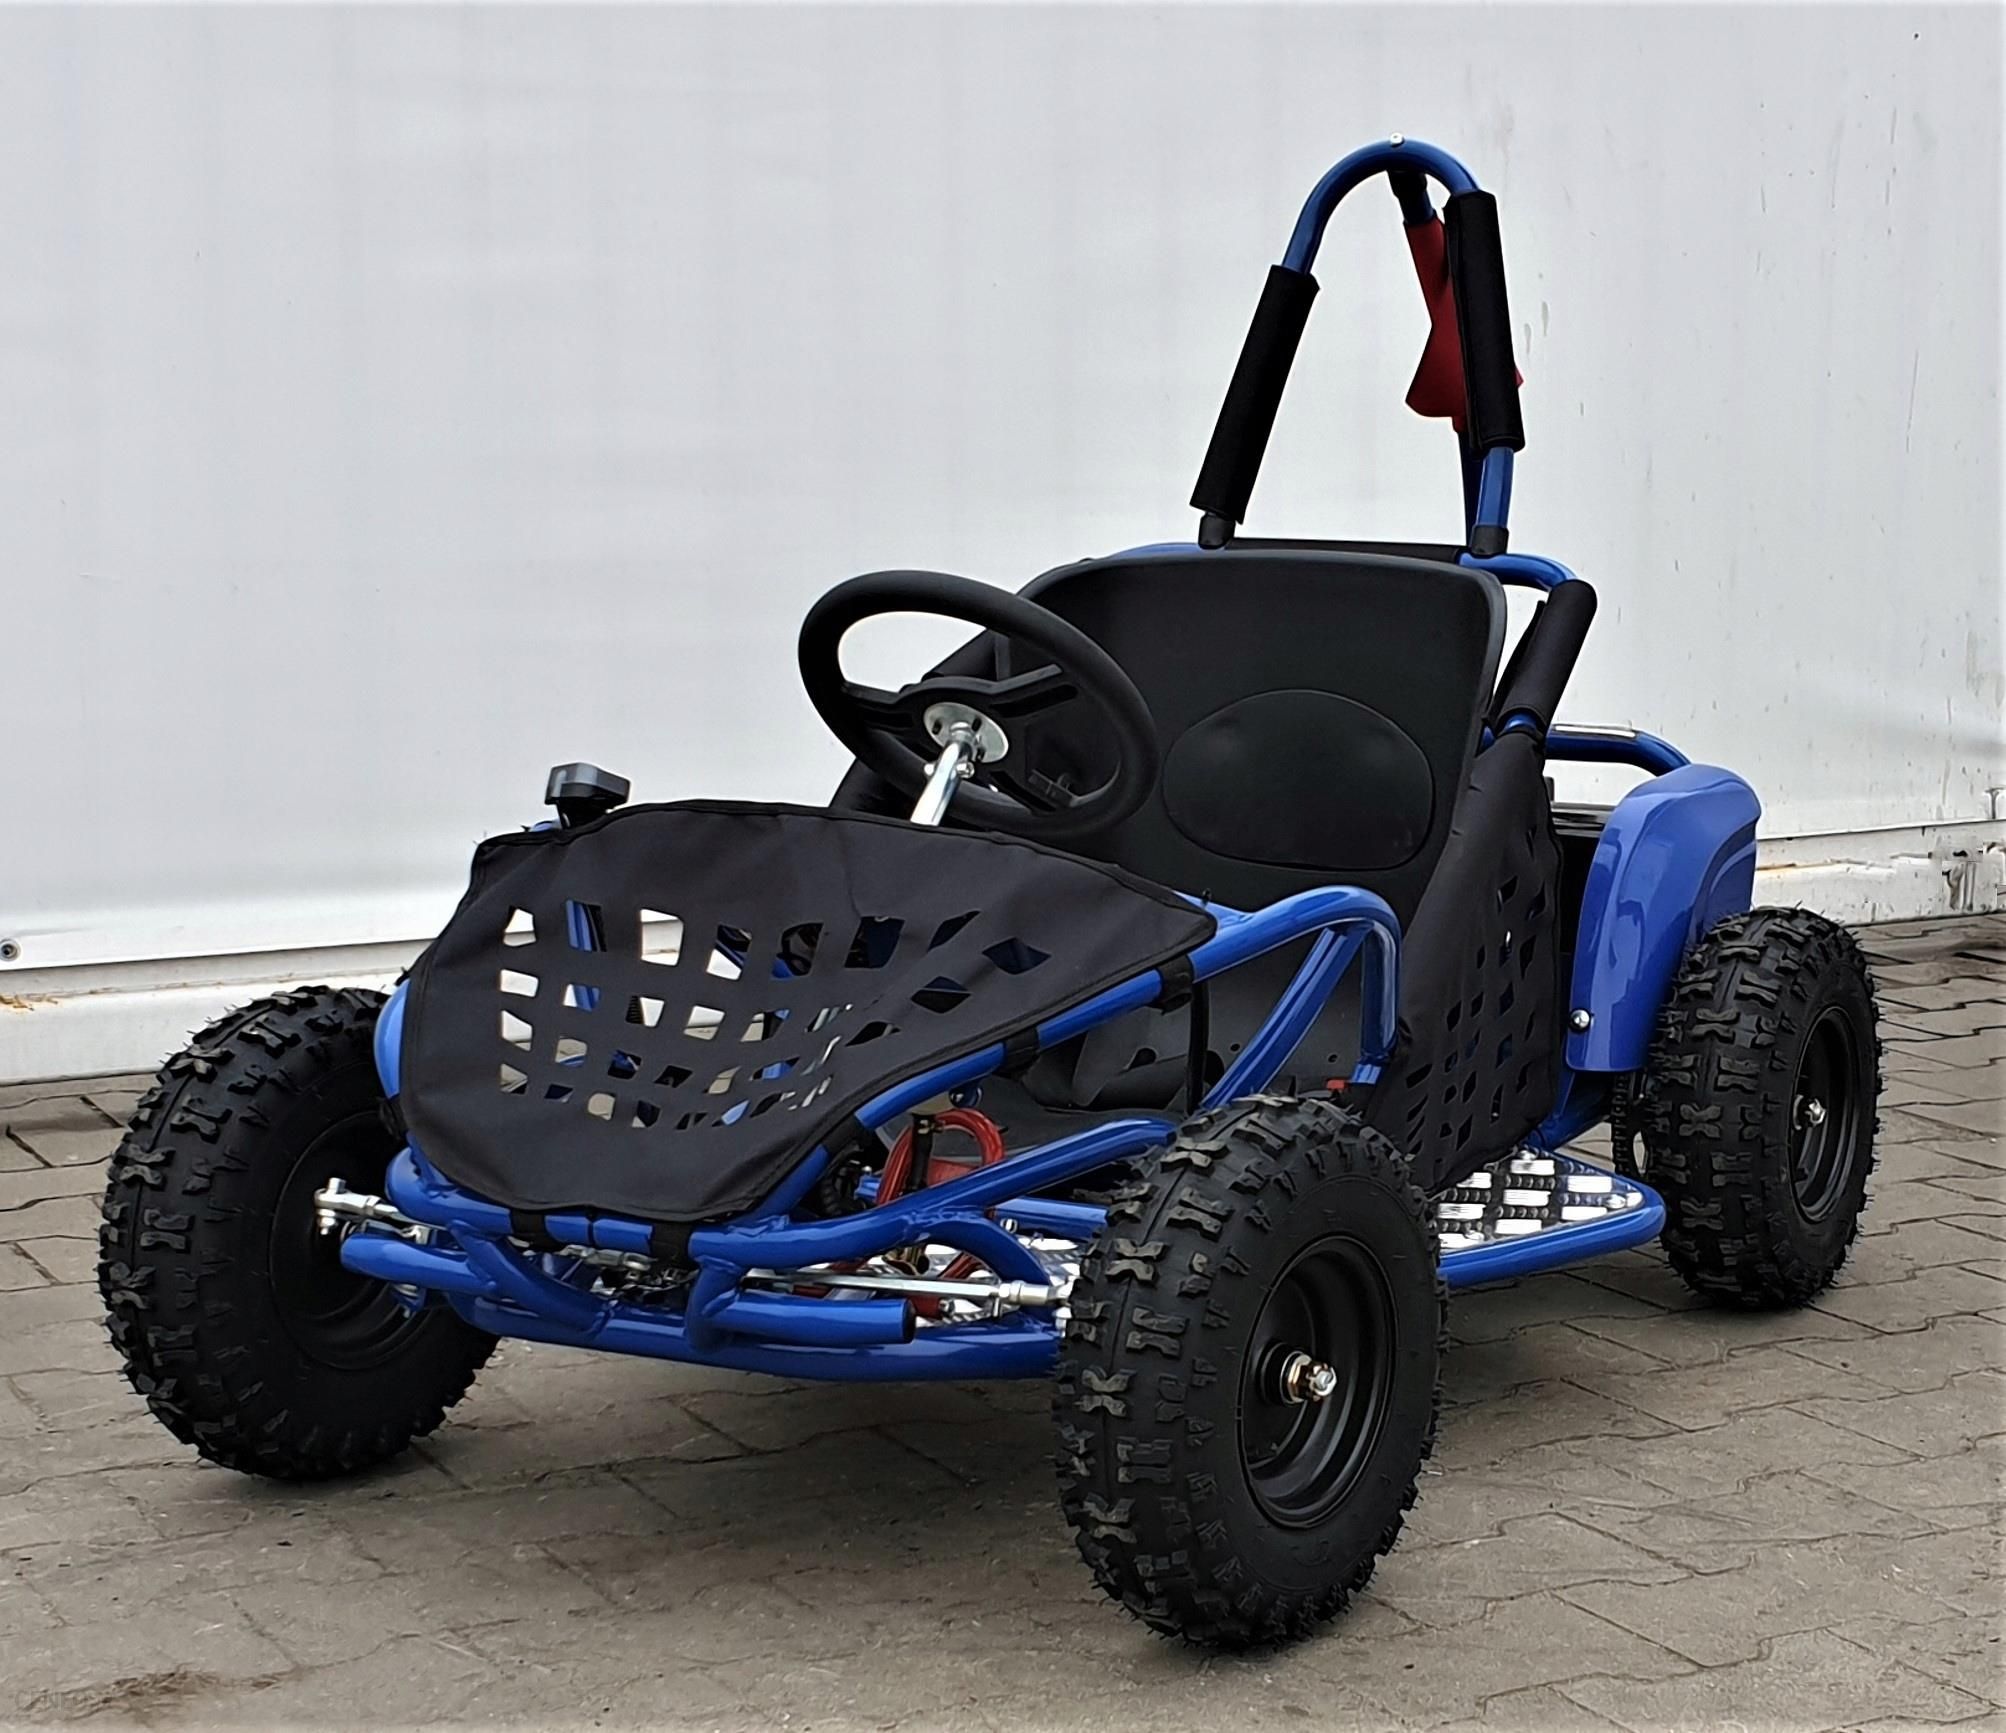 buggy 1000w